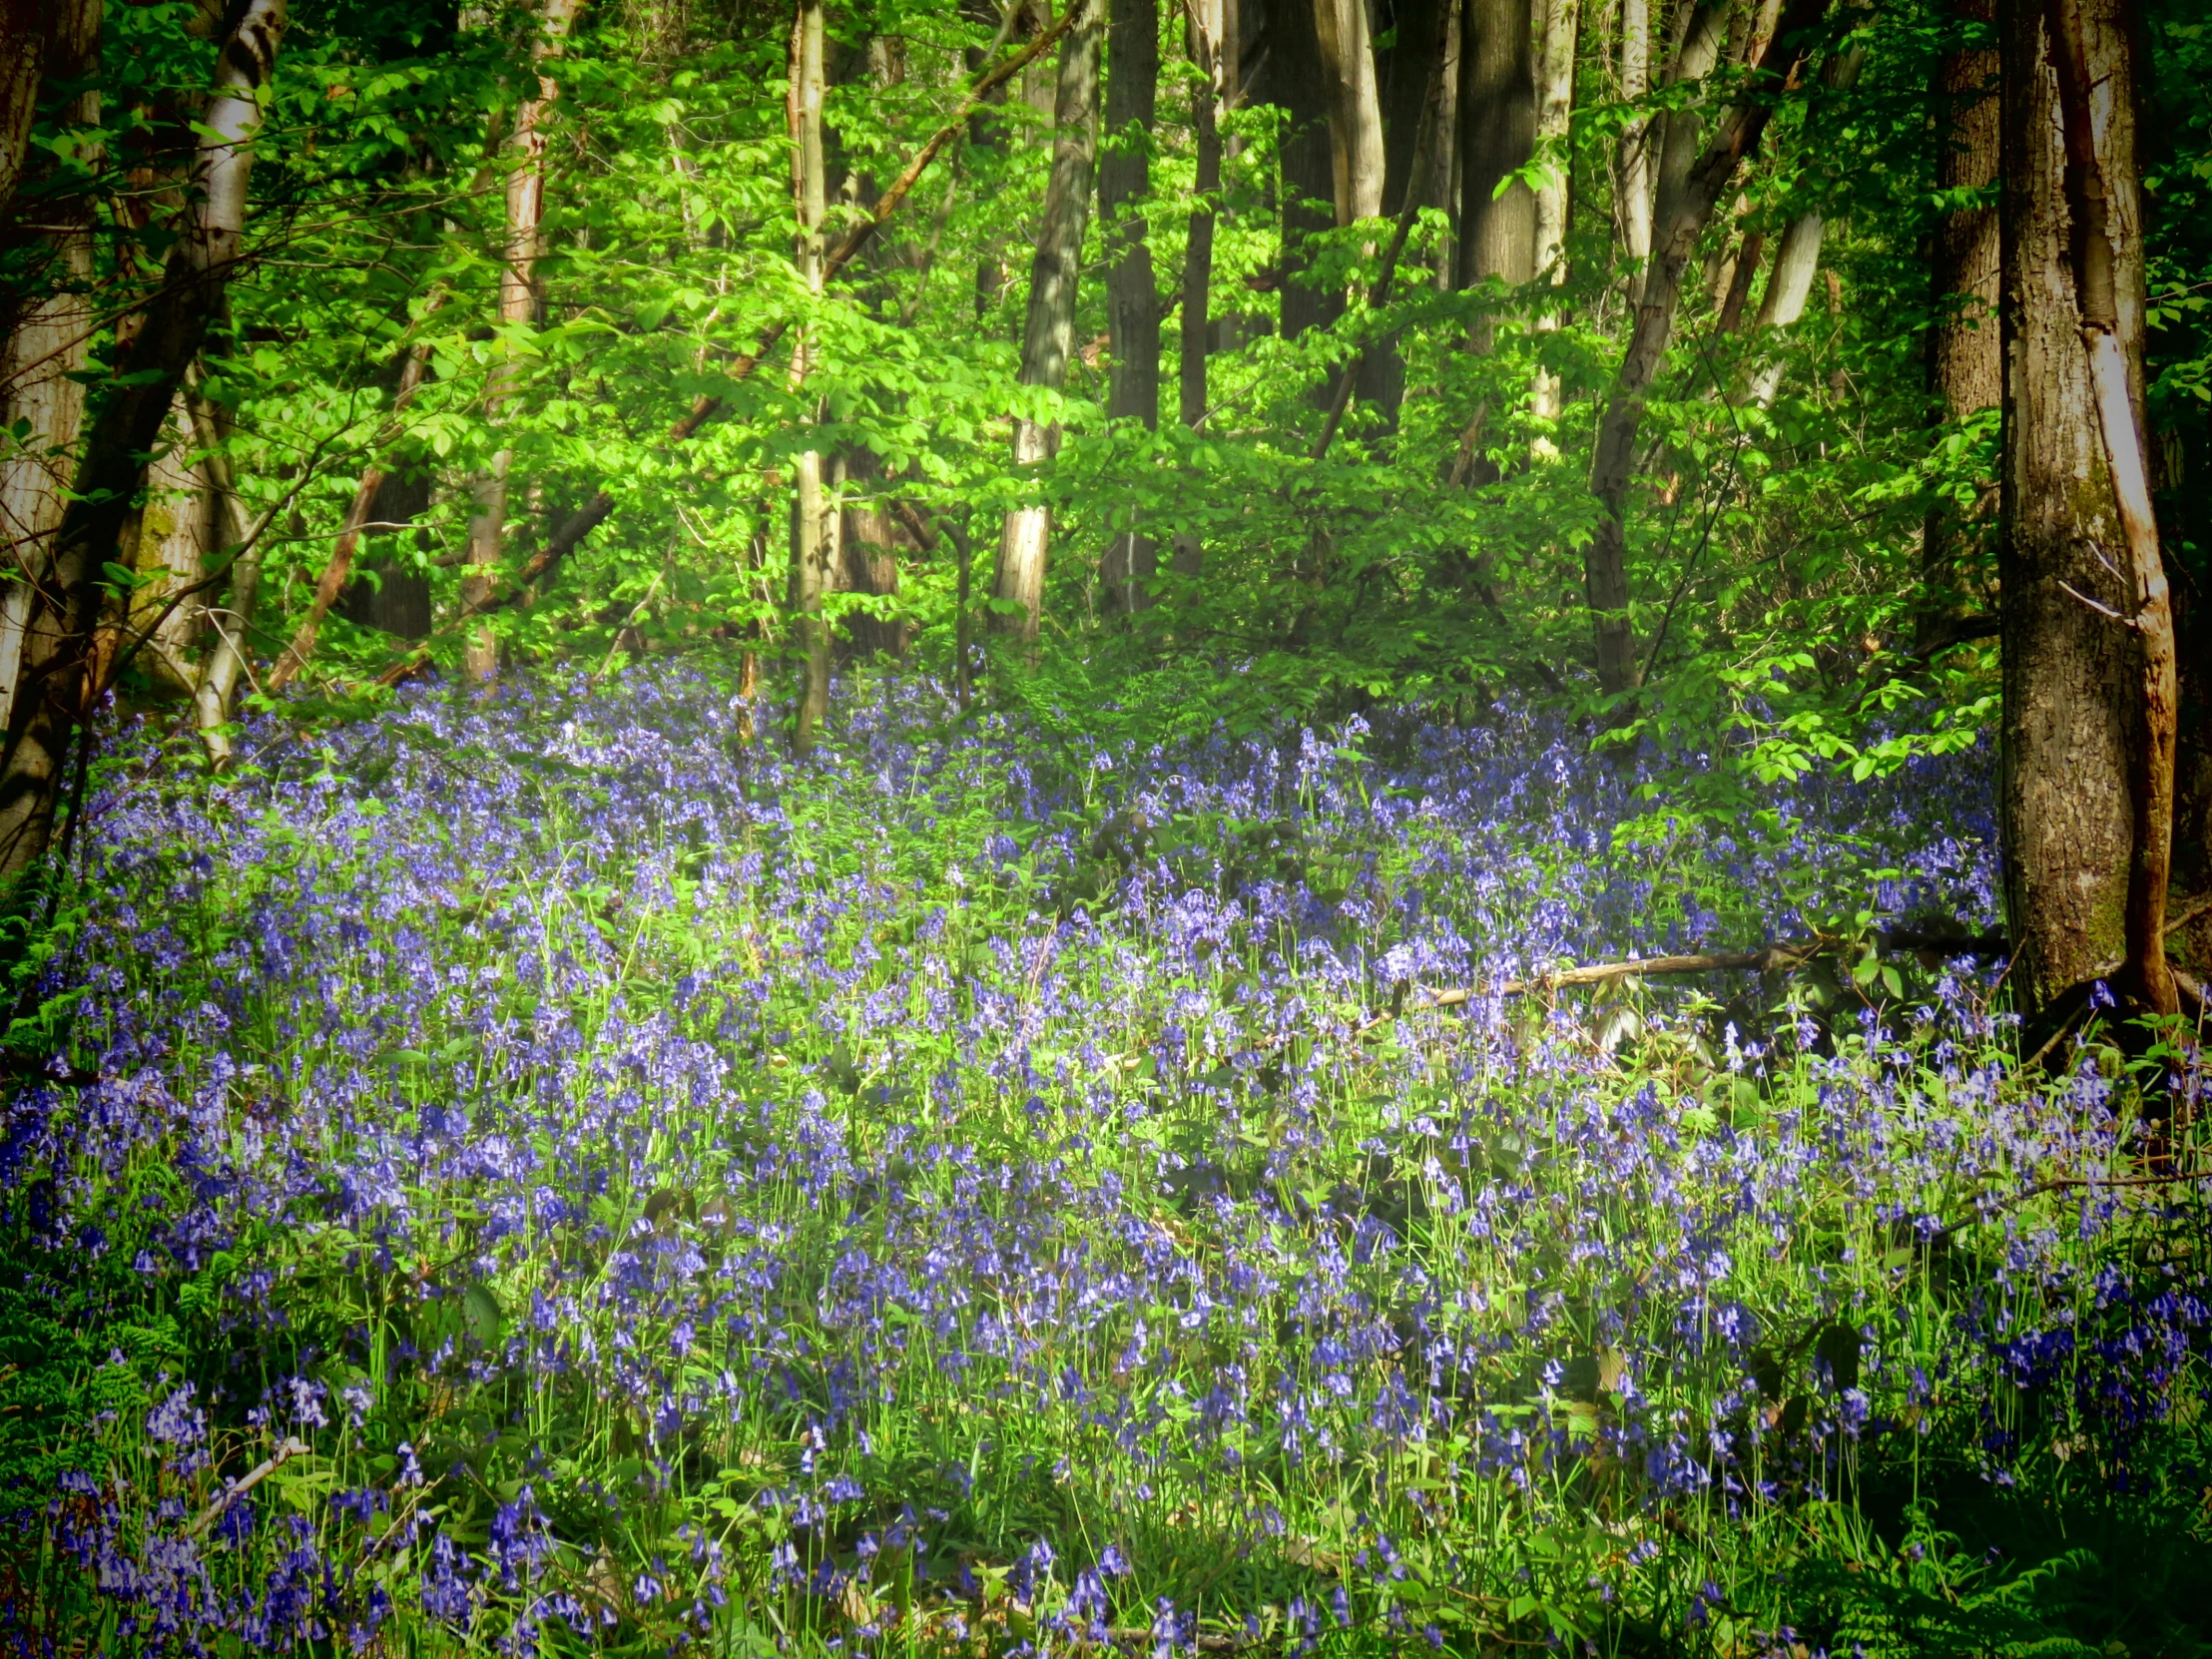 blue flowers in the forest with trees behind them